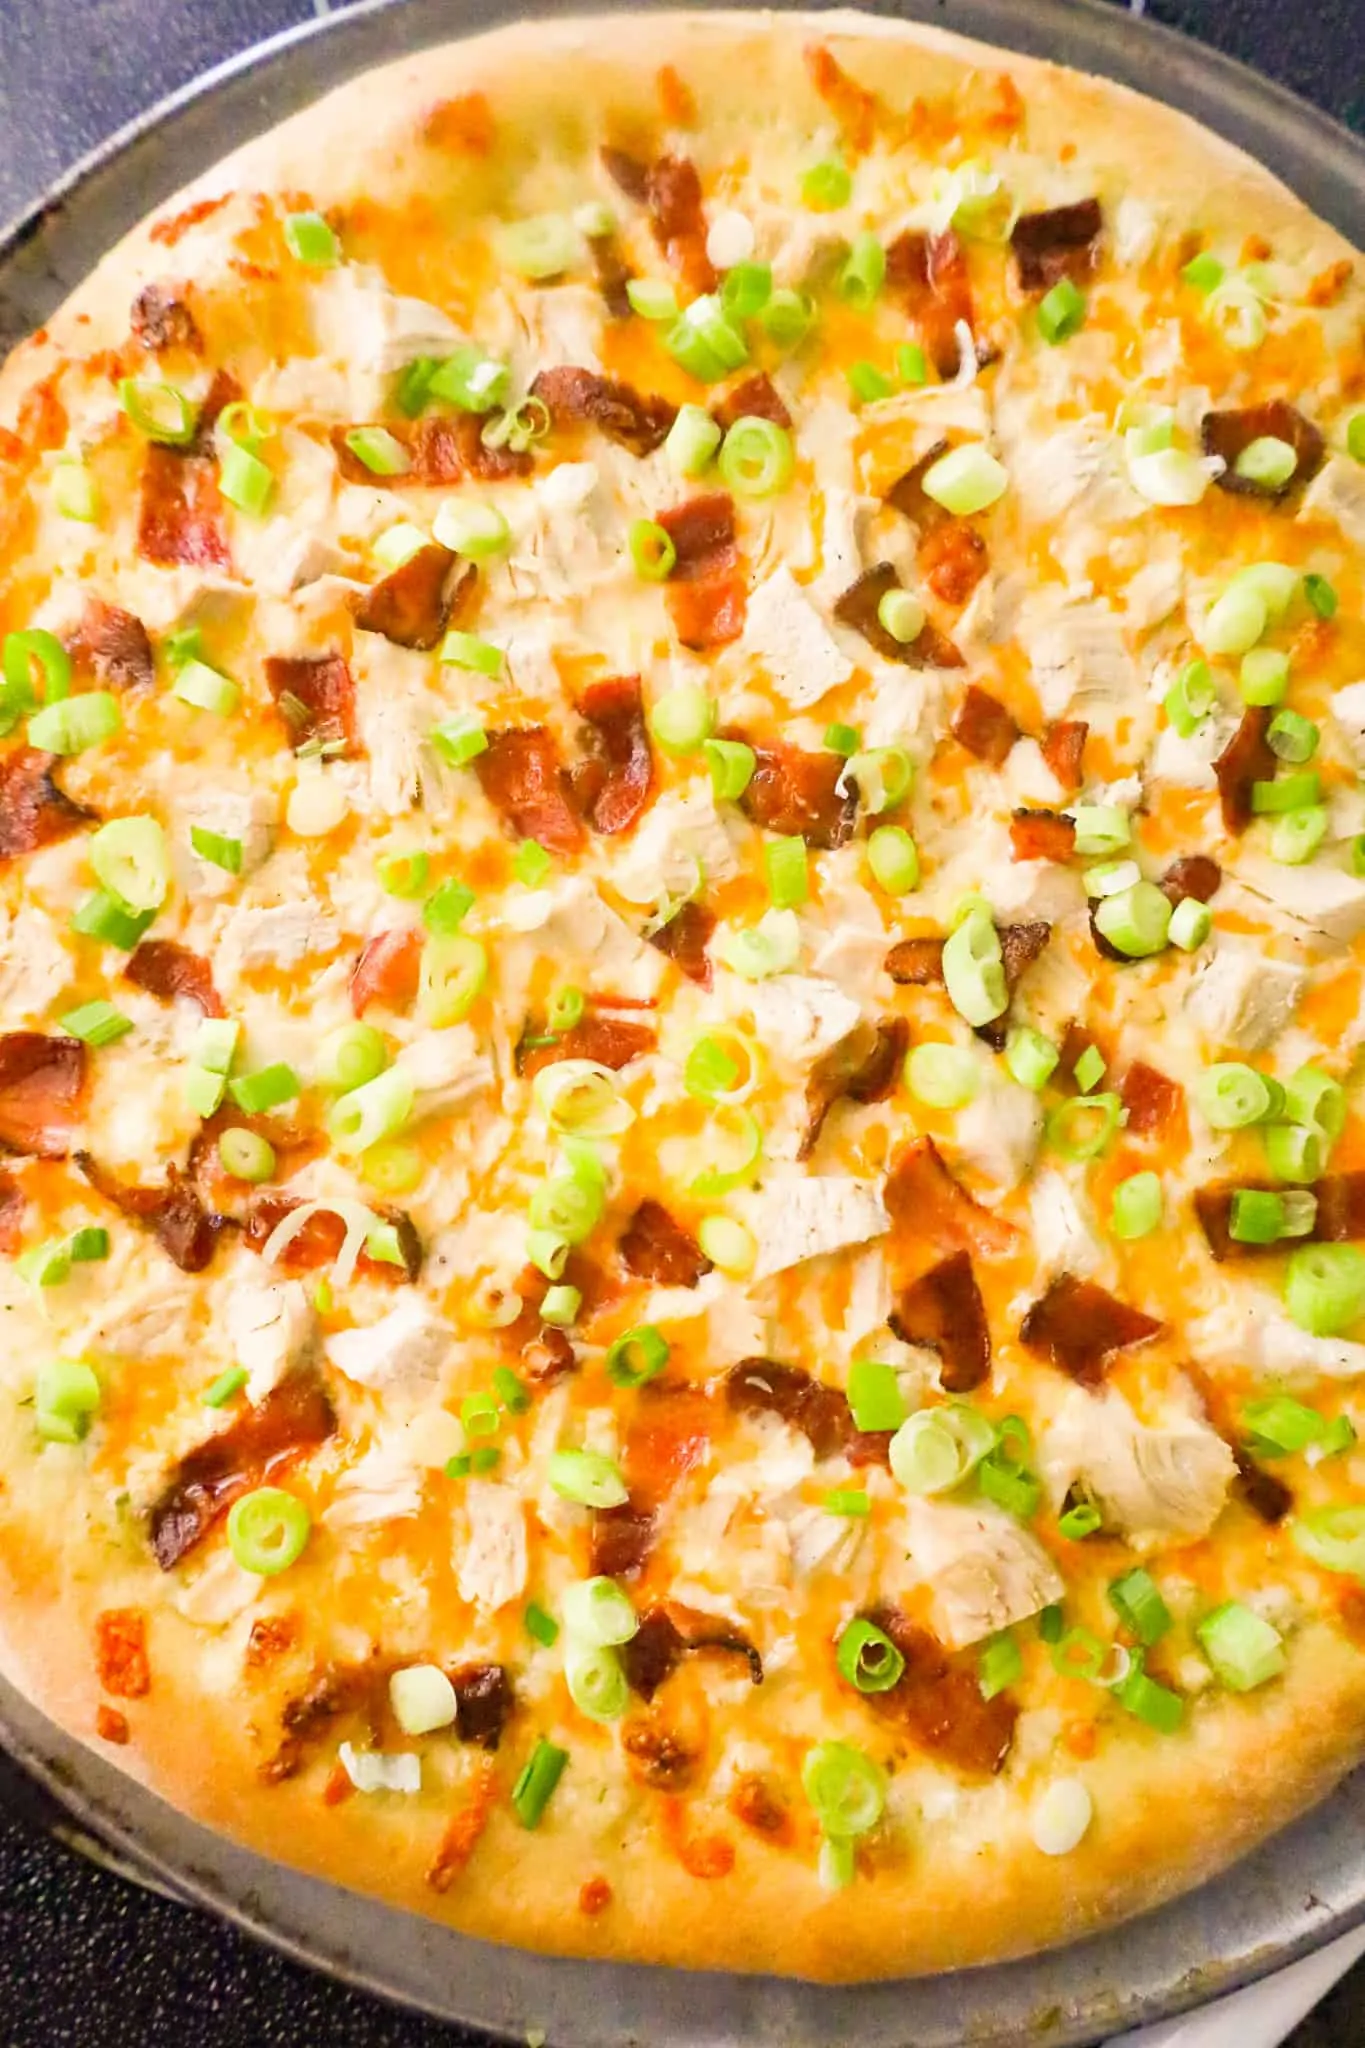 chopped green onions on top of chicken and bacon pizza after baking